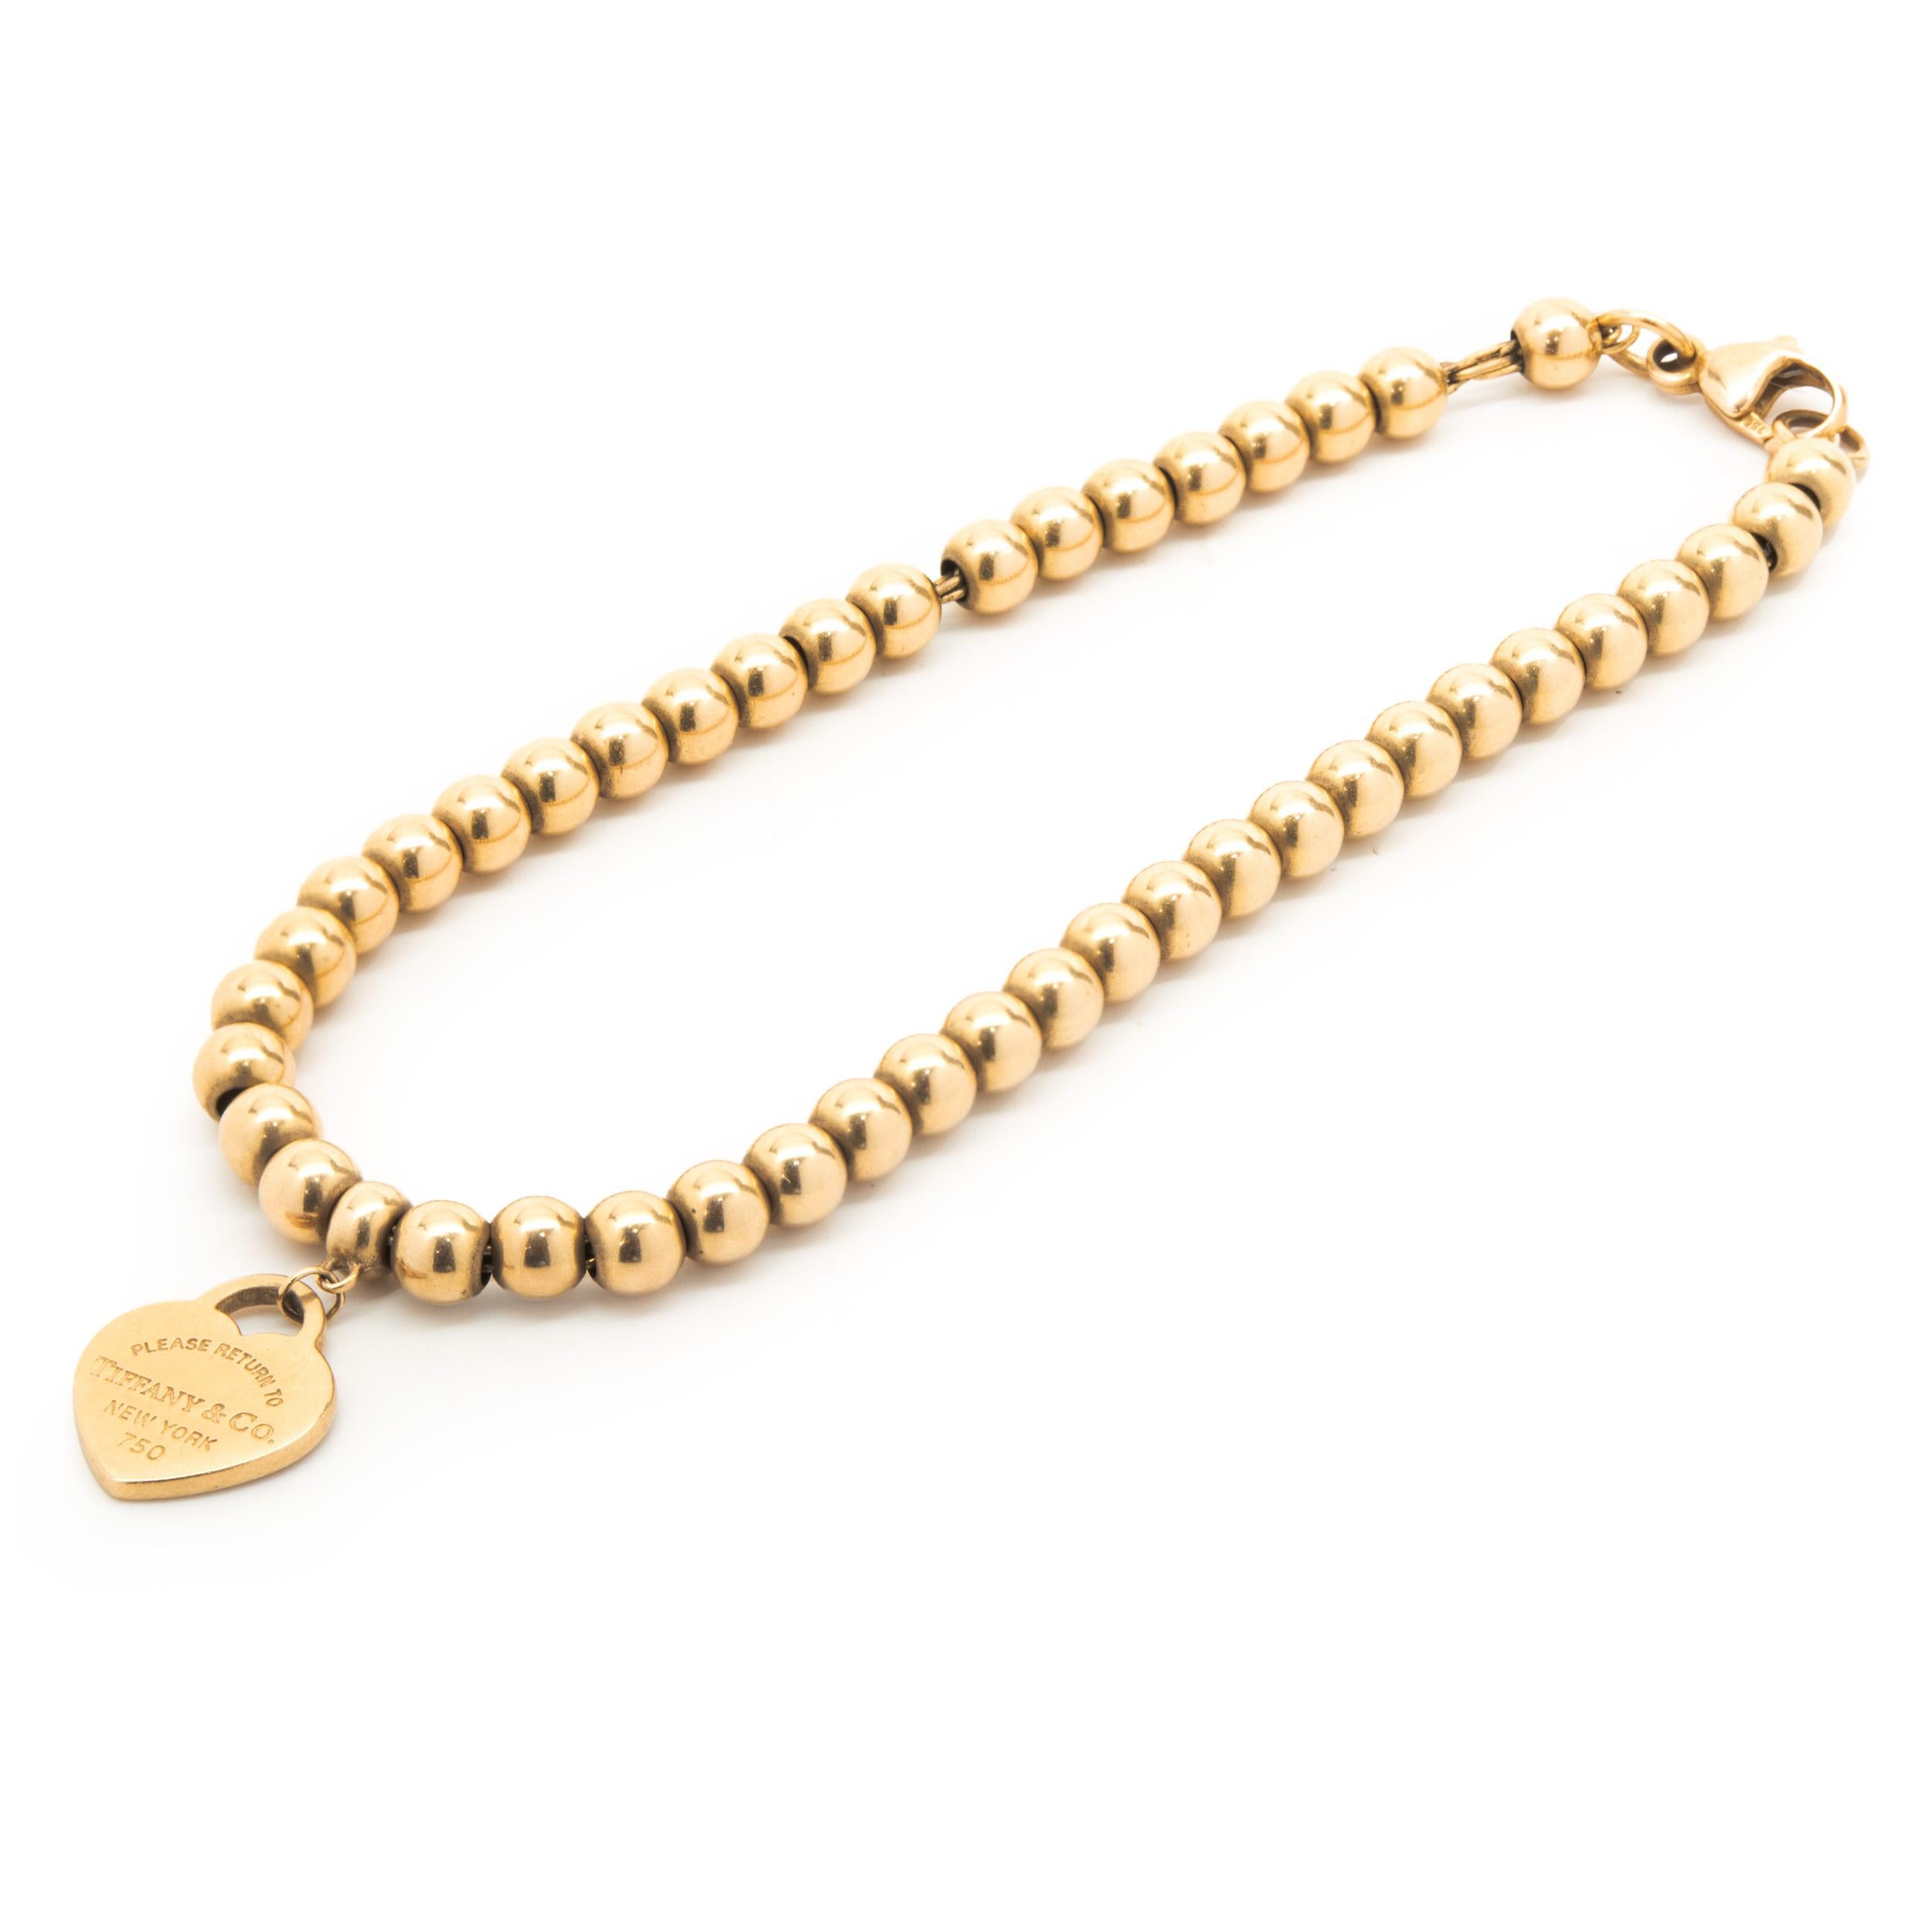 Designer: Tiffany & Co. 
Material: 18K rose gold
Dimensions: bracelet will fit a 6.5-inch wrist
Weight: 8.08 grams
